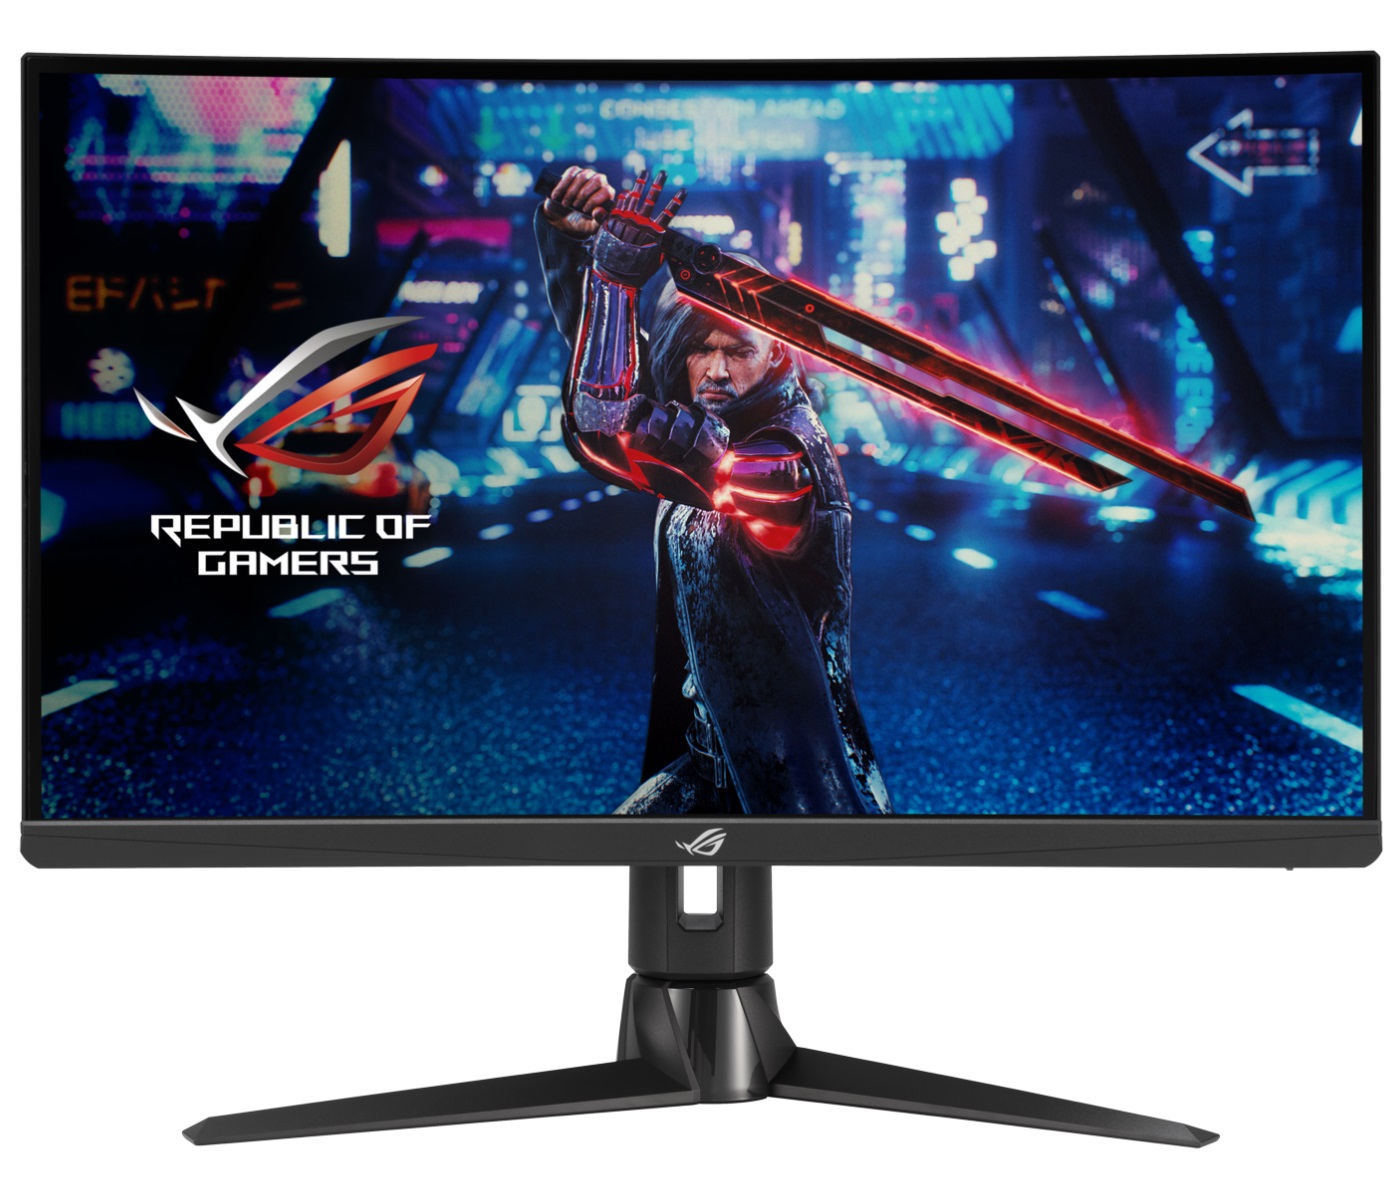 New Designed for Xbox monitors from Asus and Acer offer 4K at 120 Hz and  HDMI 2.1 for Xbox Series X